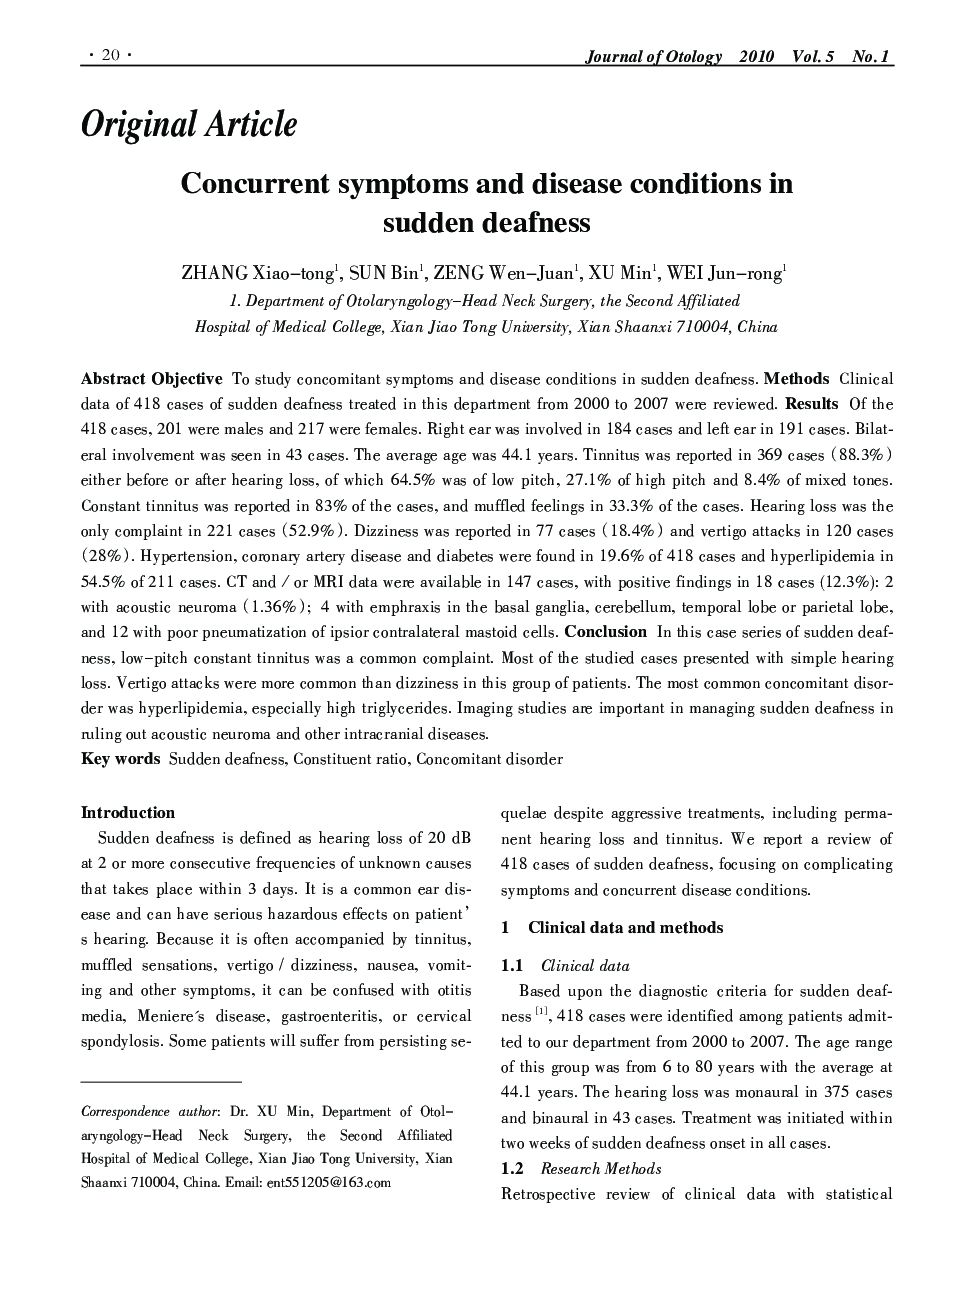 Concurrent symptoms and disease conditions in sudden deafness